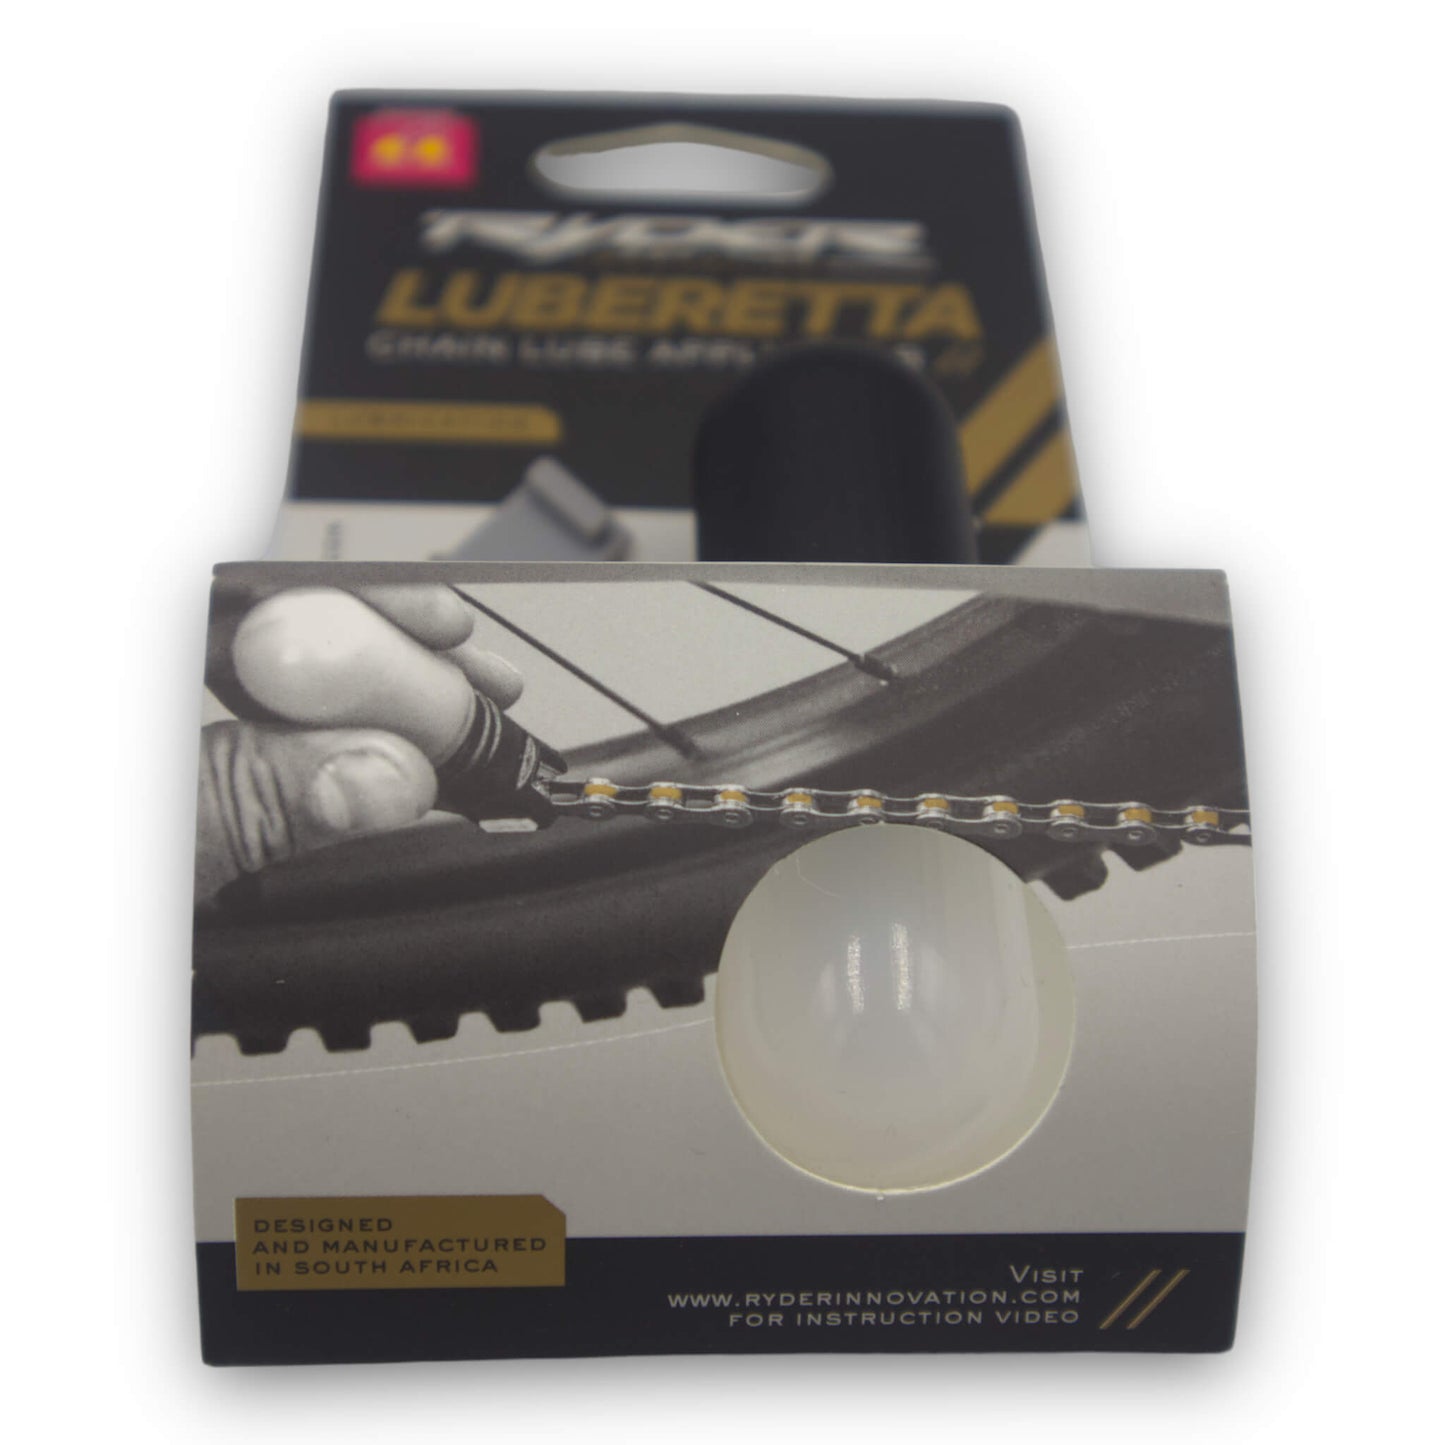 Ryder Luberetta Compact Chain Lube Dispenser